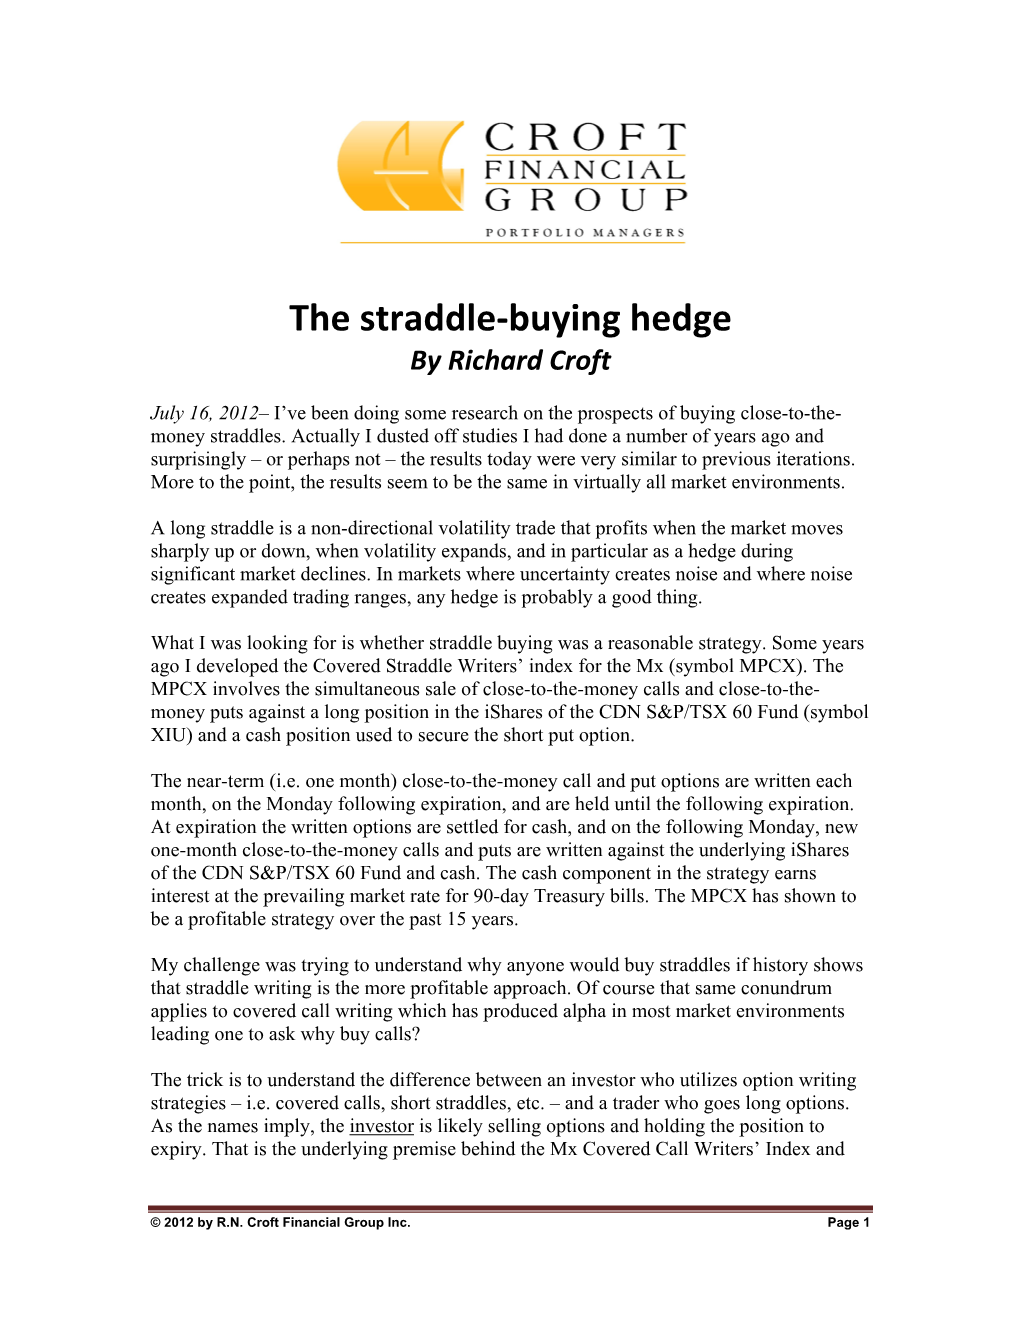 The Straddle-Buying Hedge